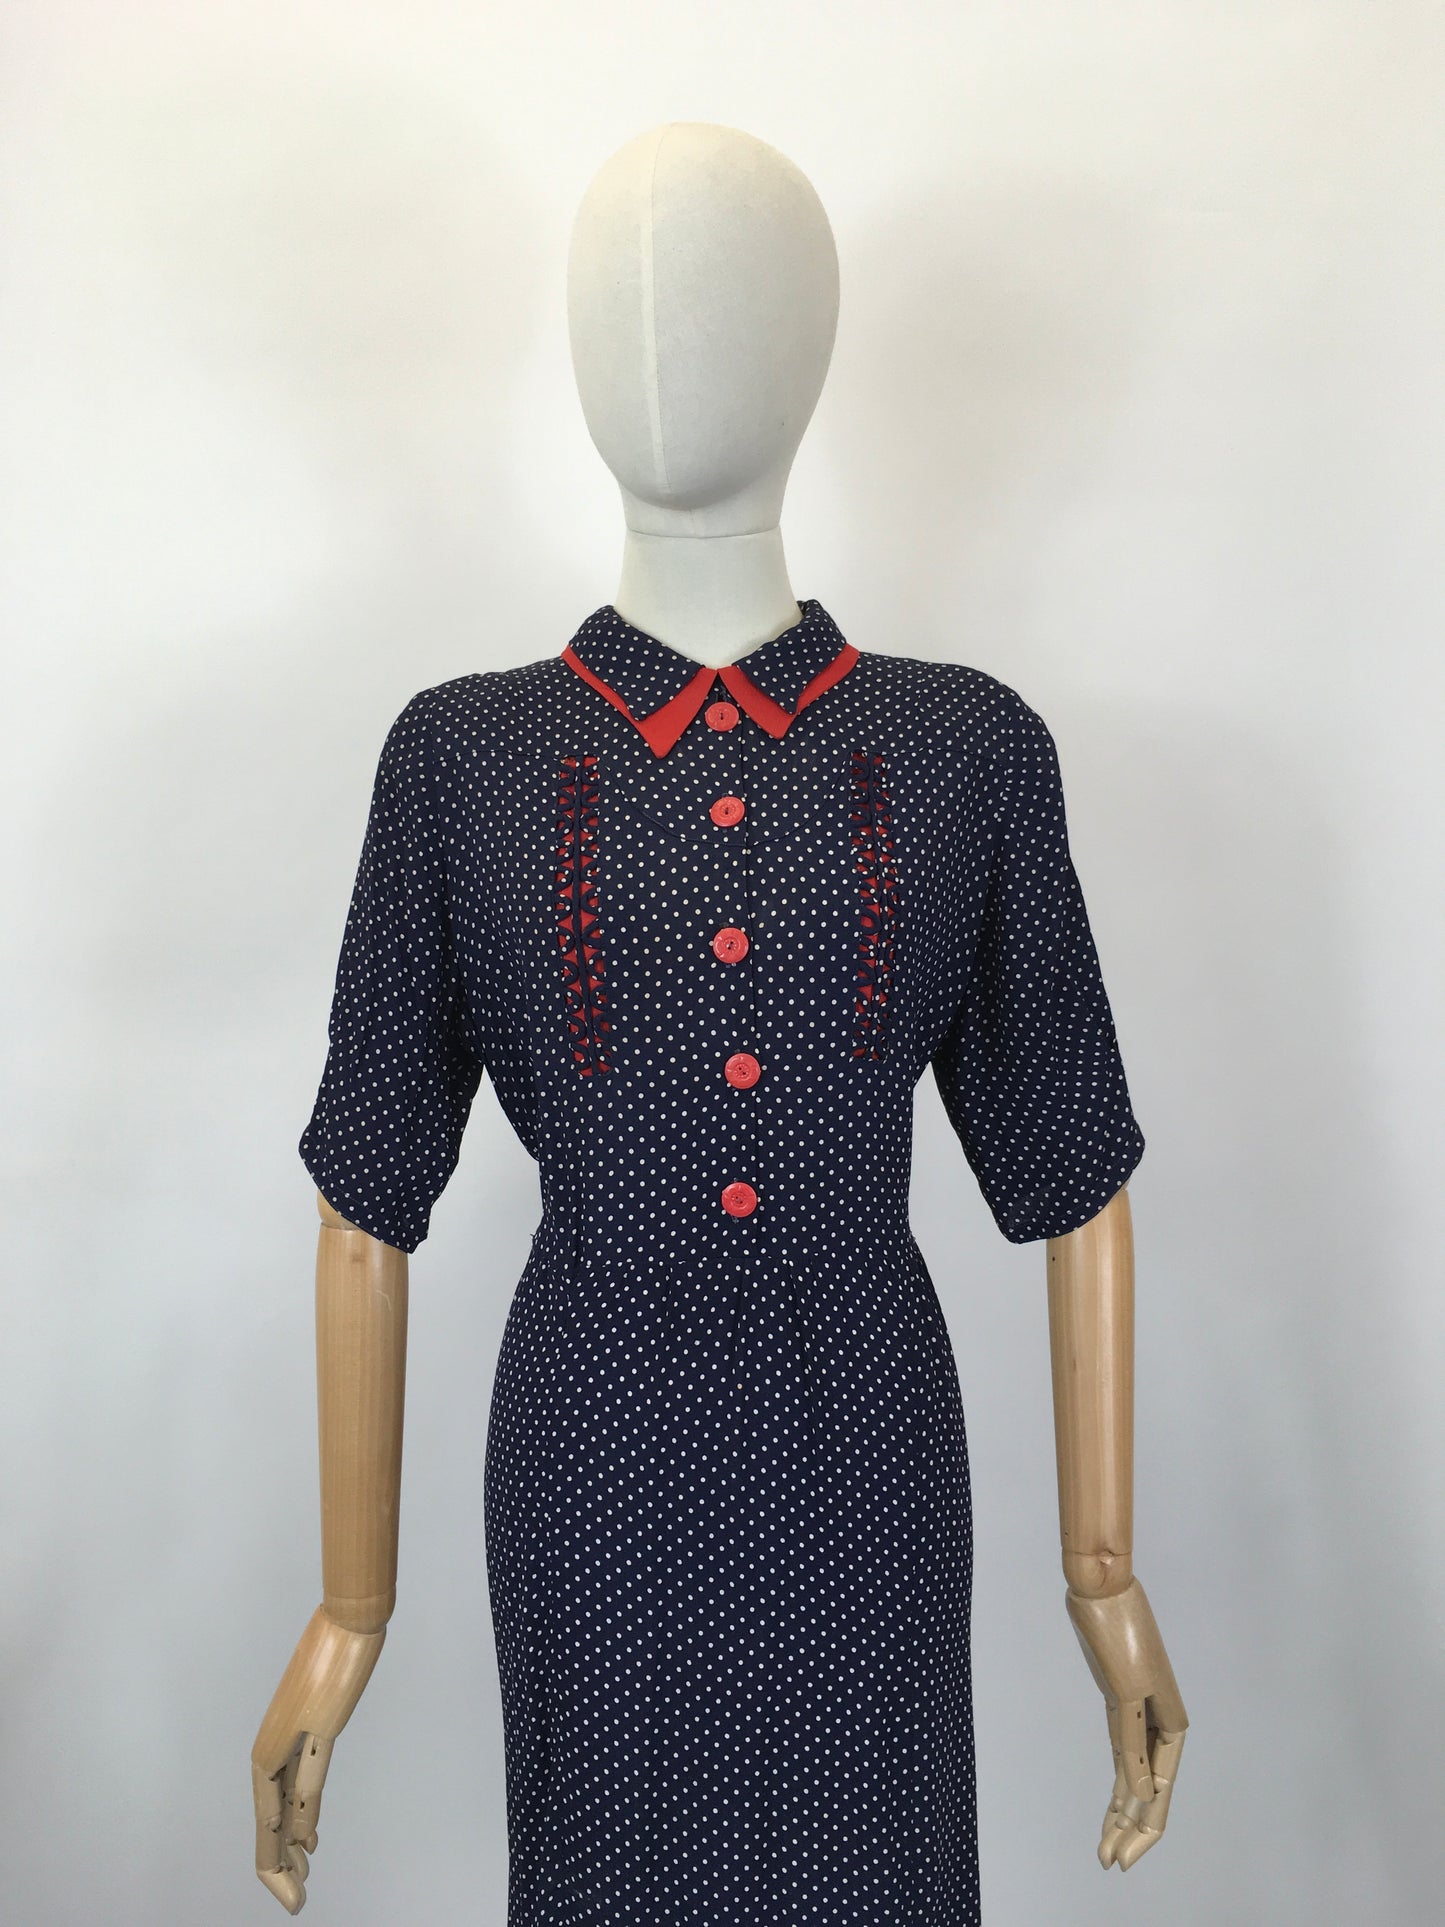 Original 1940's Sensational Volup Rayon Dress - In Navy, White & Red with Contrast Fretwork Embelishment